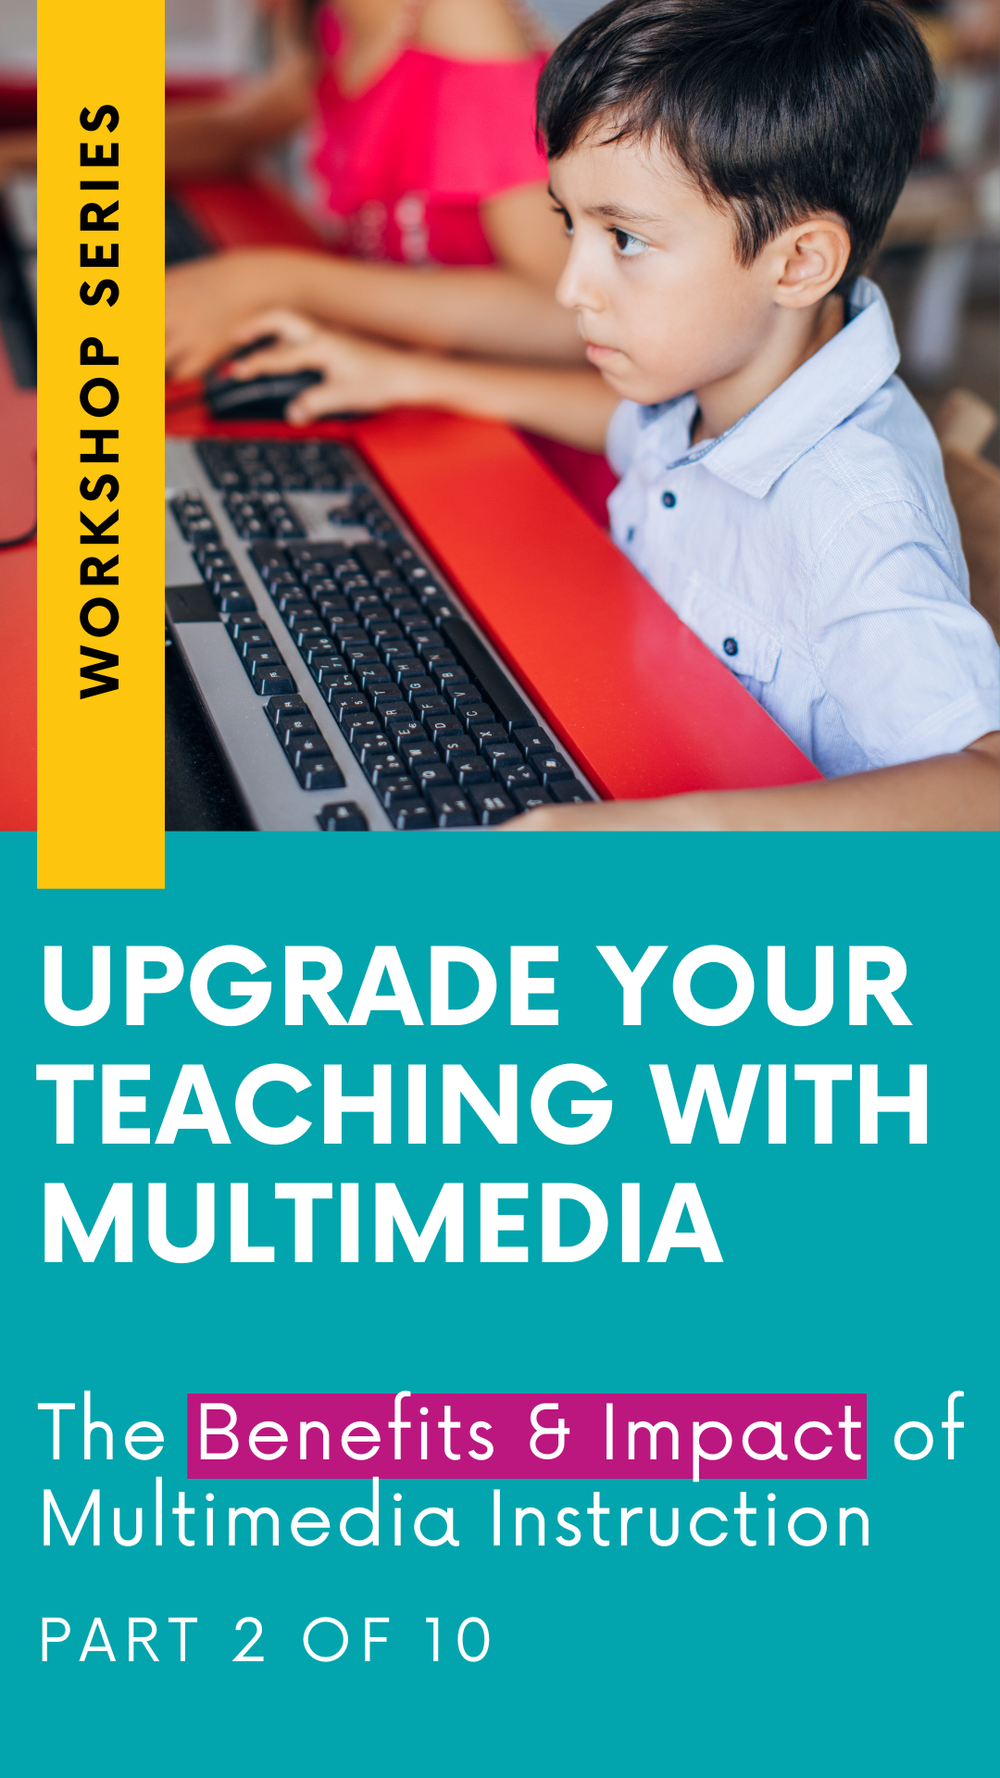 Upgrade Your Teaching With Multimedia Workshop Series: The Benefits & Impact of Multimedia Instruction (Part 2) (Copy)